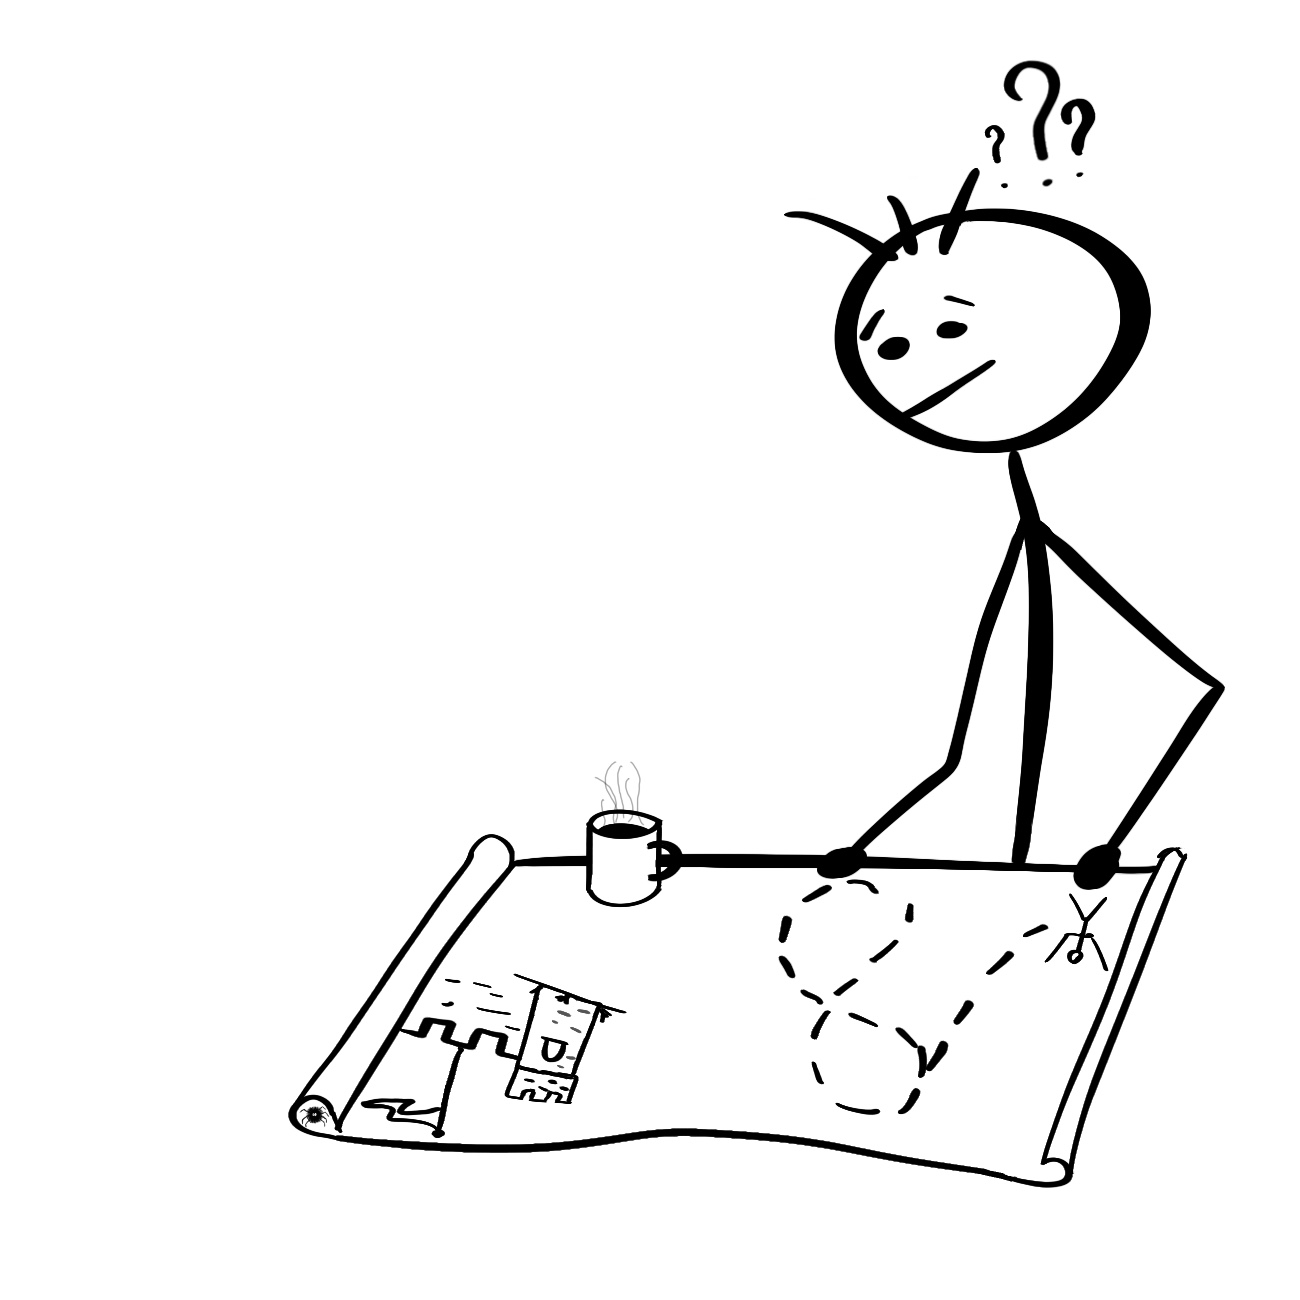 stick figure is examining a map and can't find the path to the library